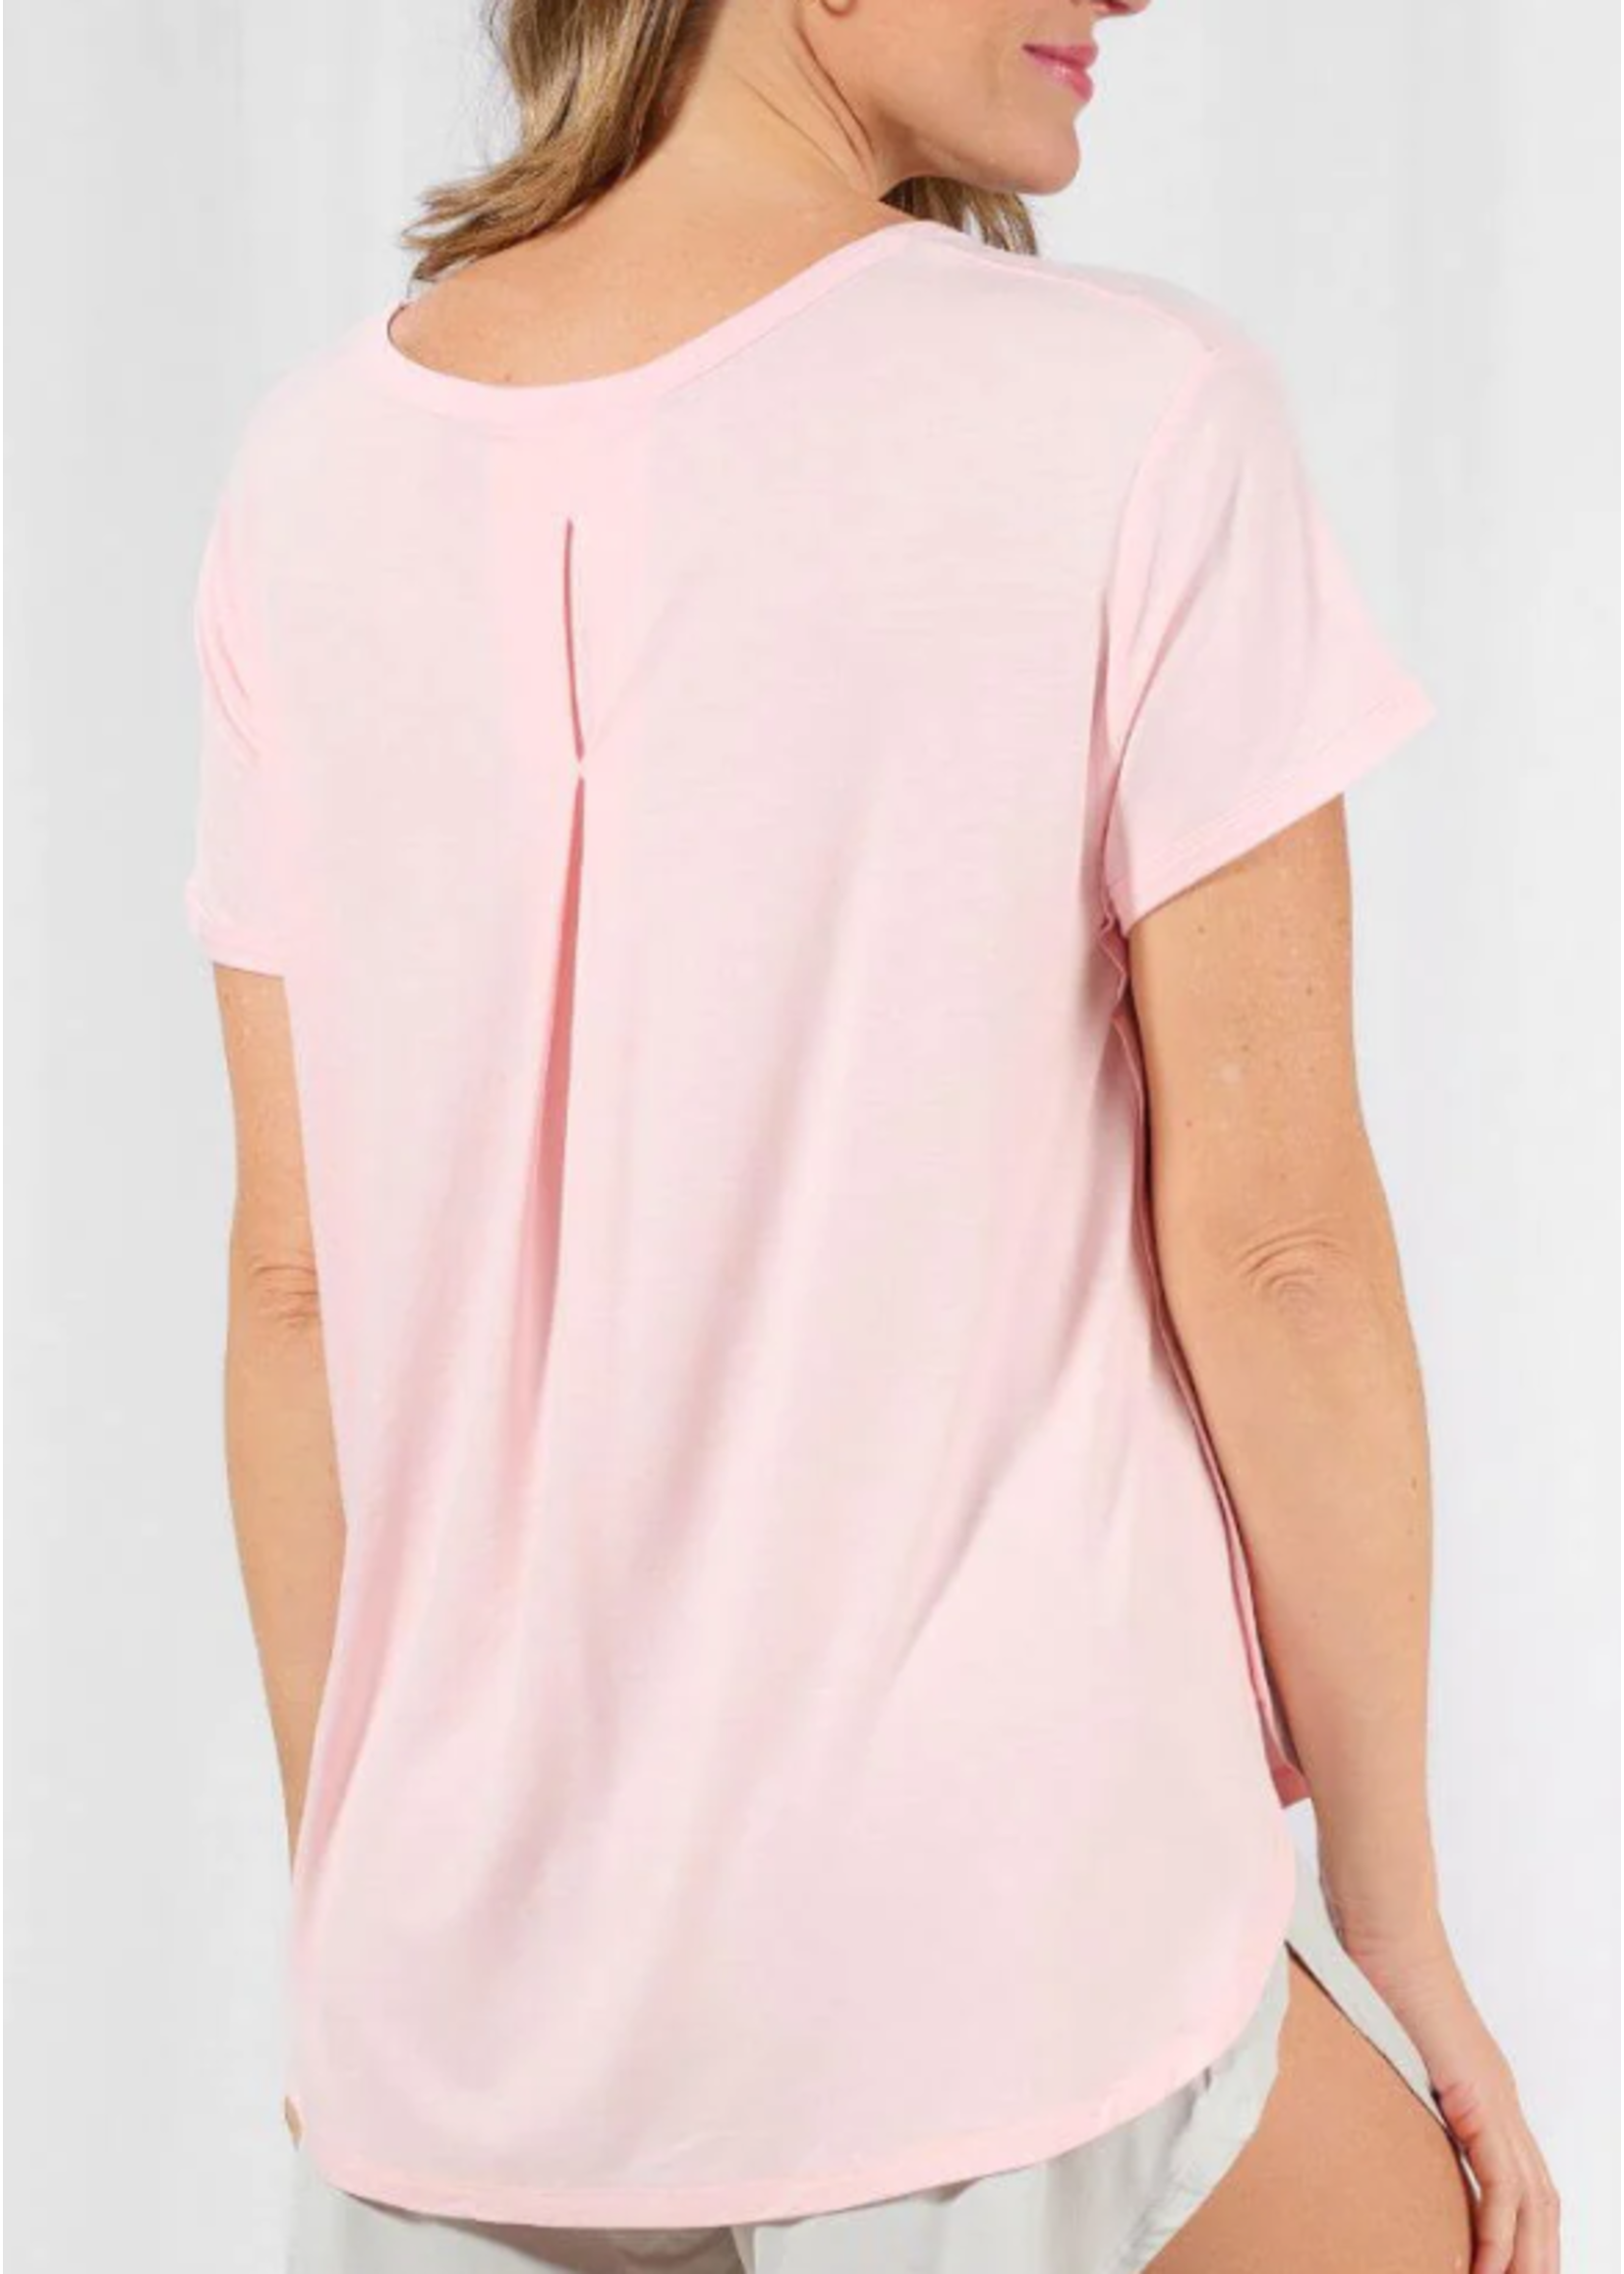 Face Plant Dreams FPD Bamboo Tulip Tee Blush Pink Small